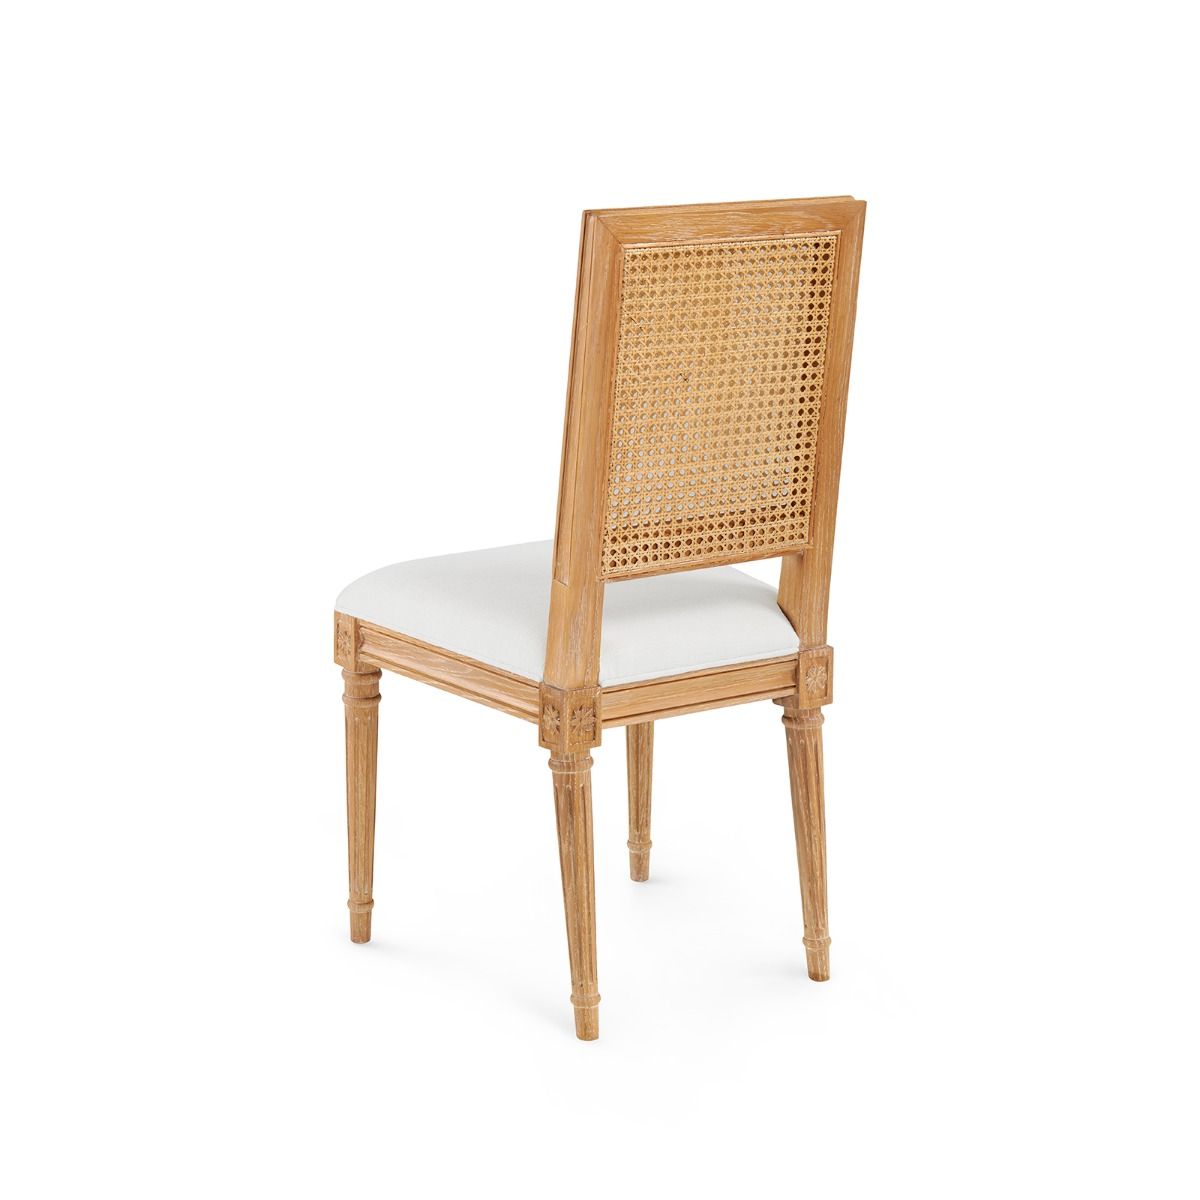 Annette Side Chair, Natural